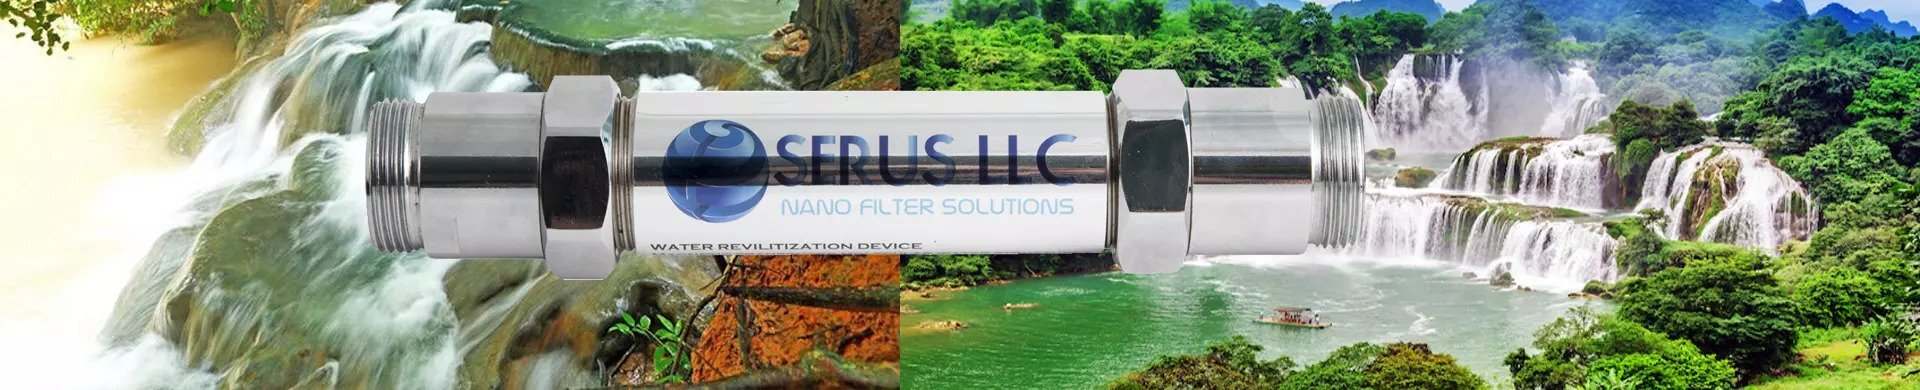 WECO Big Blue Filter Systems